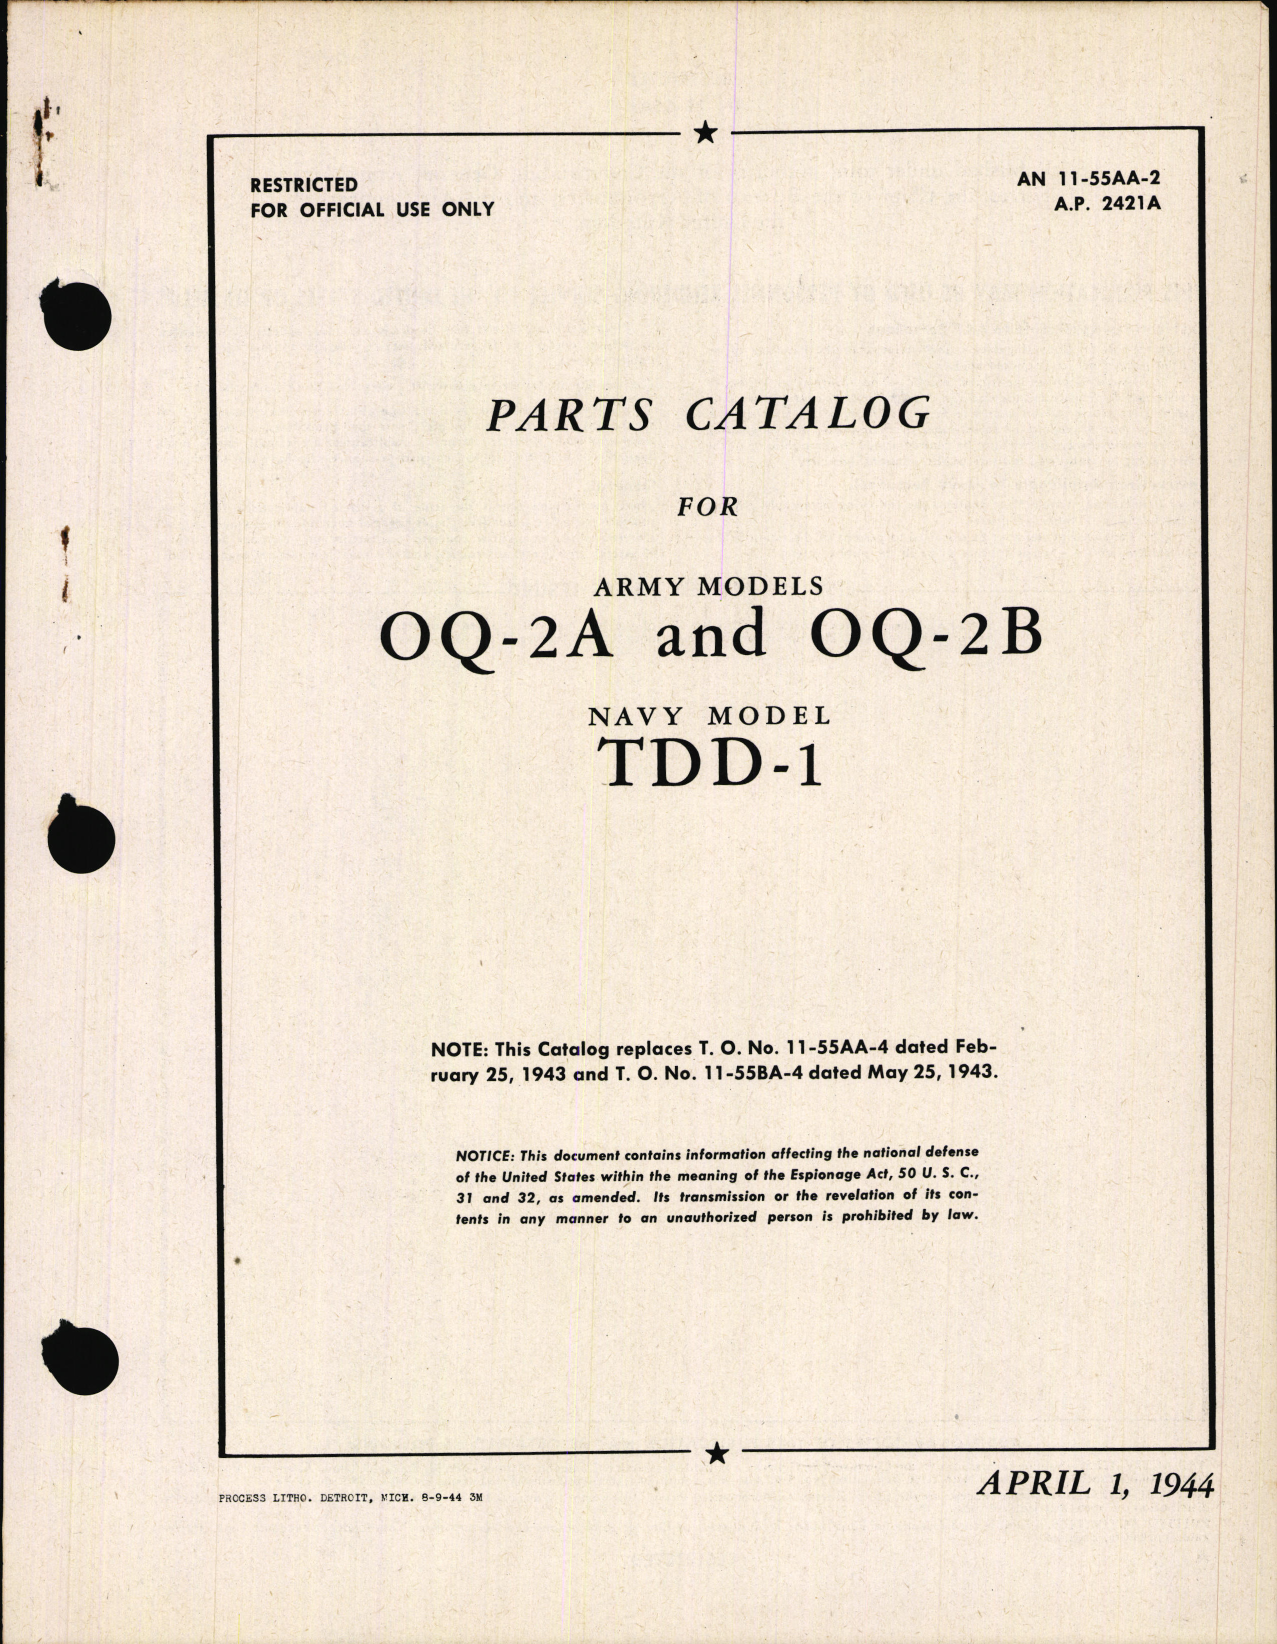 Sample page 1 from AirCorps Library document: Parts Catalog for Army Models OQ-2A, OQ-2B, and Navy Model TTD-1